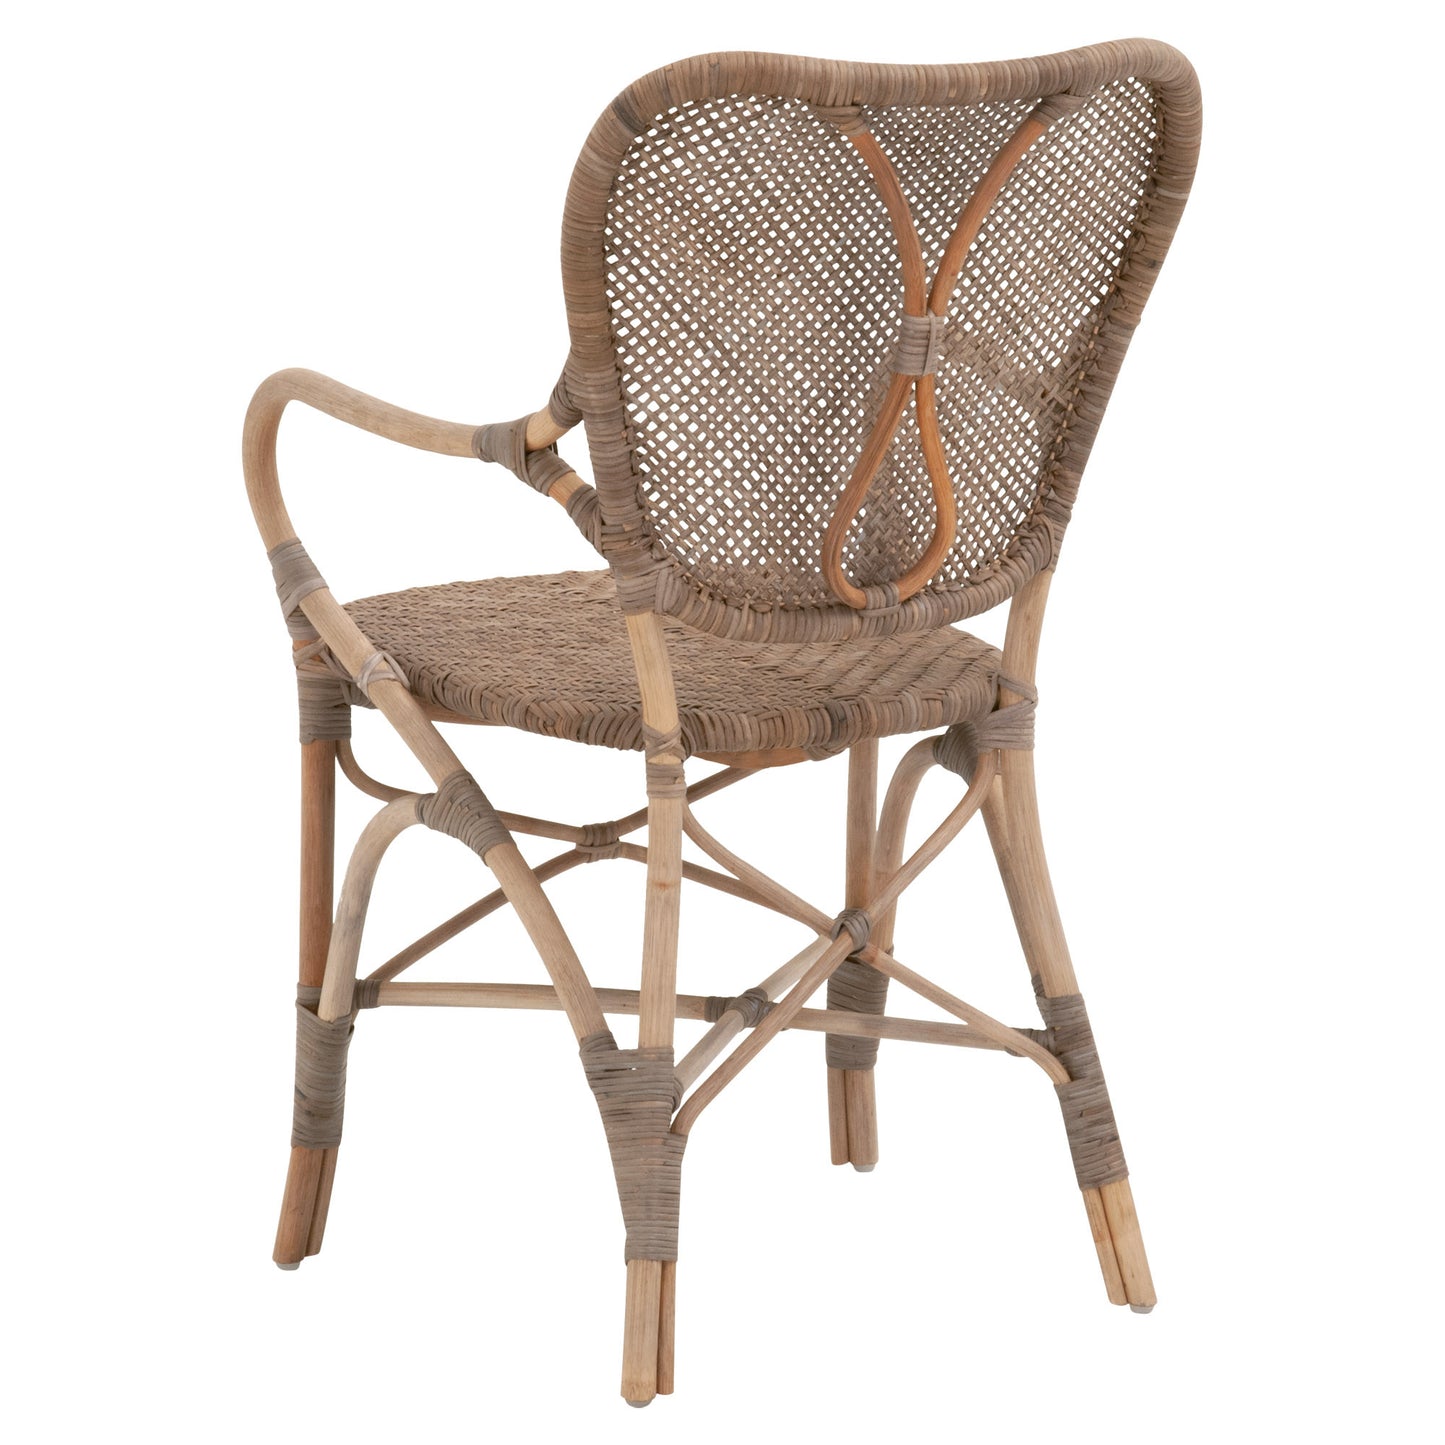 Brown Rattan Bentwood Back Arm chair